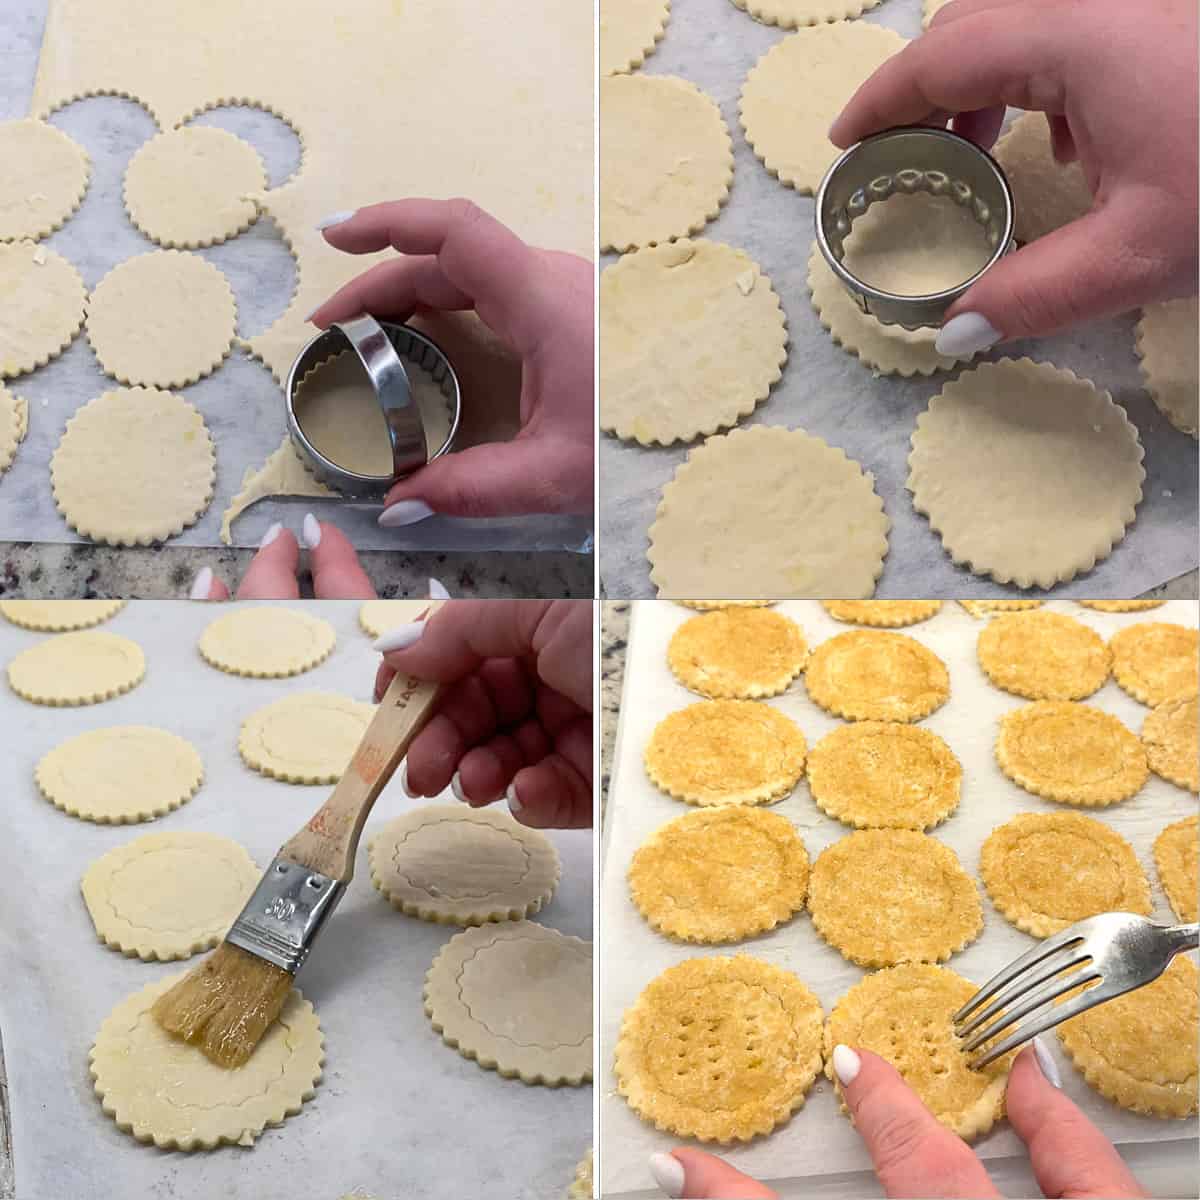 Step by step process of the puff pastry tarts being made